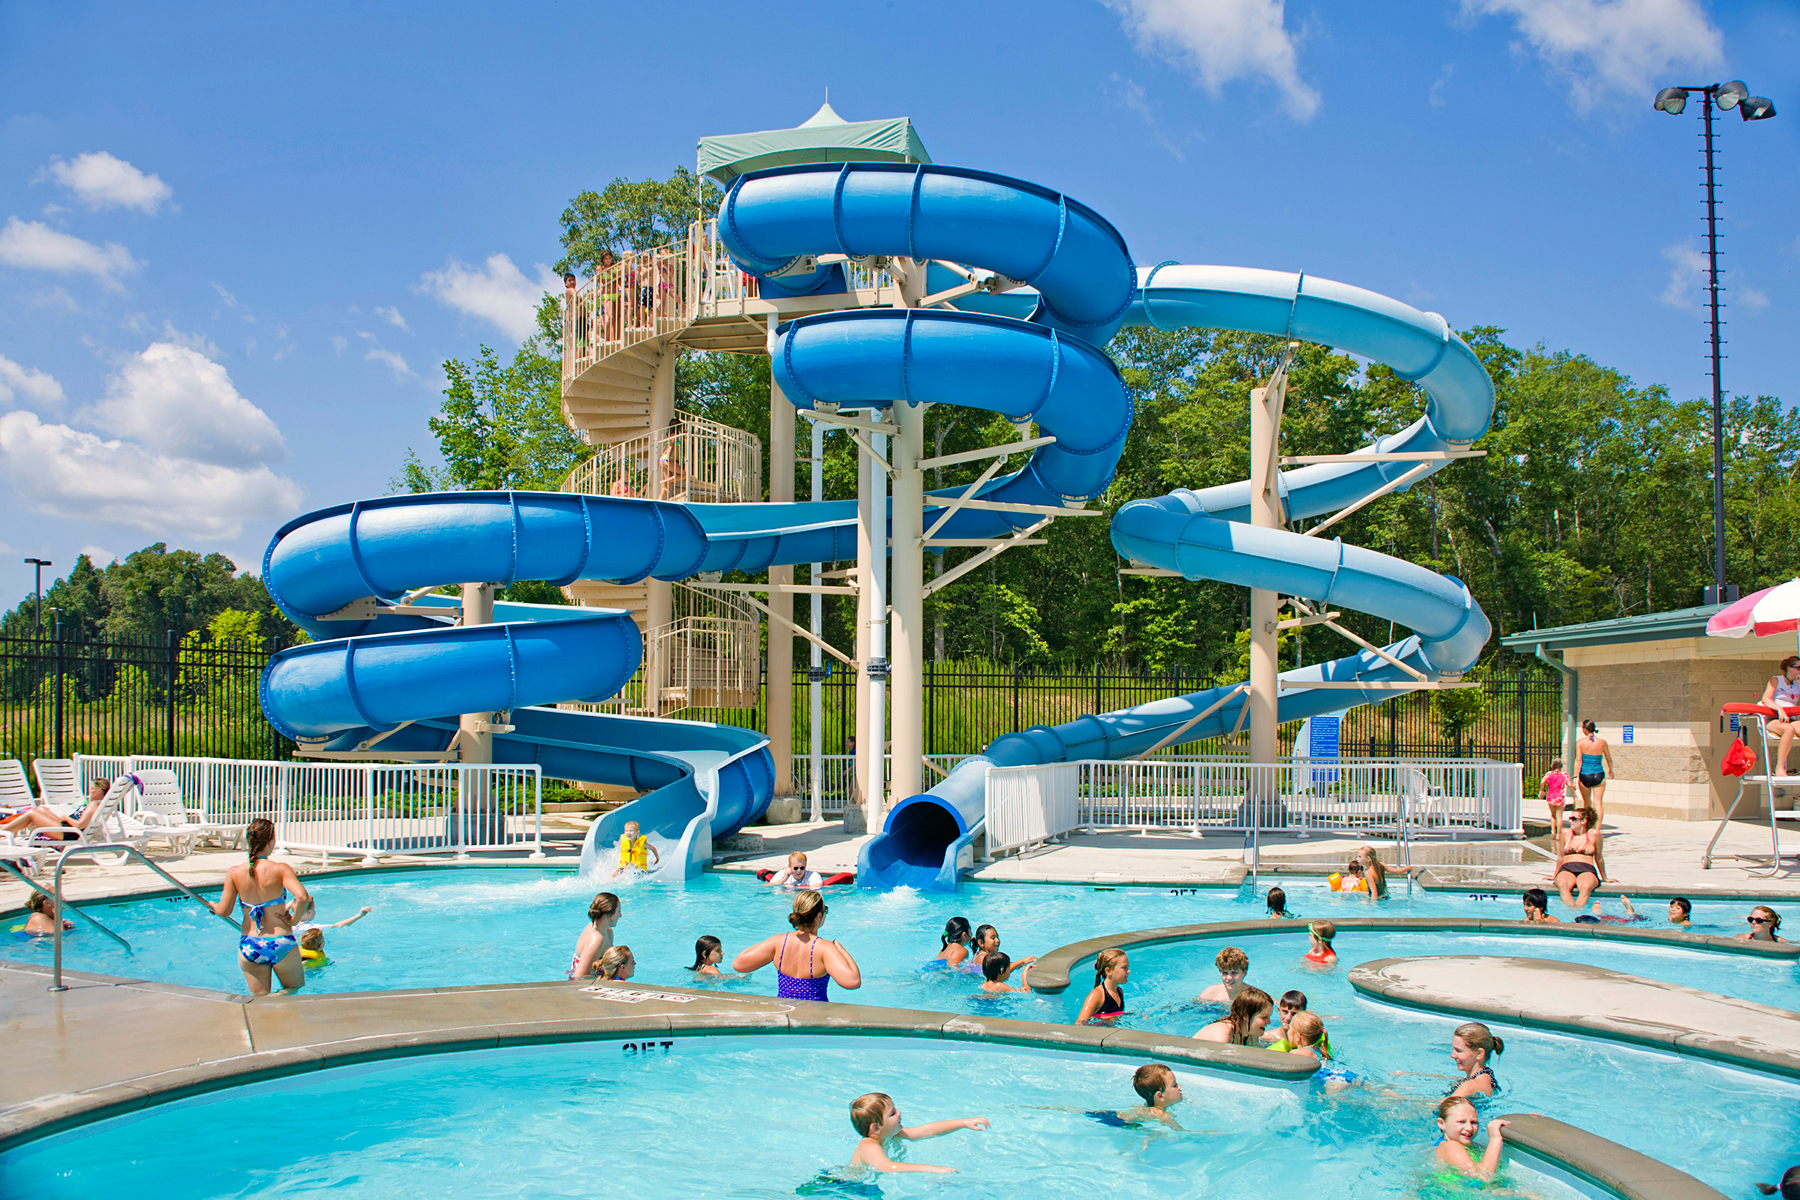 The Frances Meadows Aquatic Center boasts two three-story tall body slides.